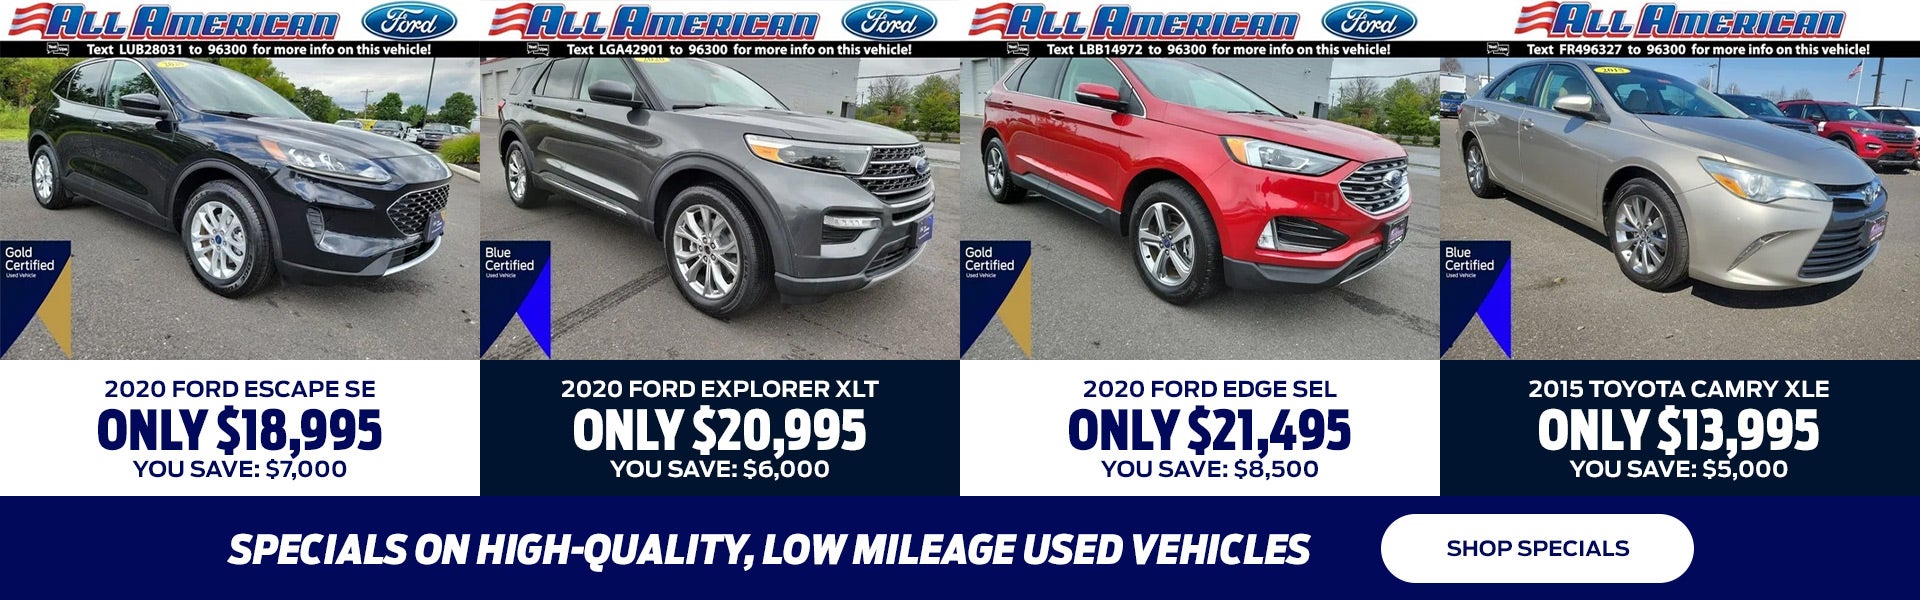 Used Vehicle Specials